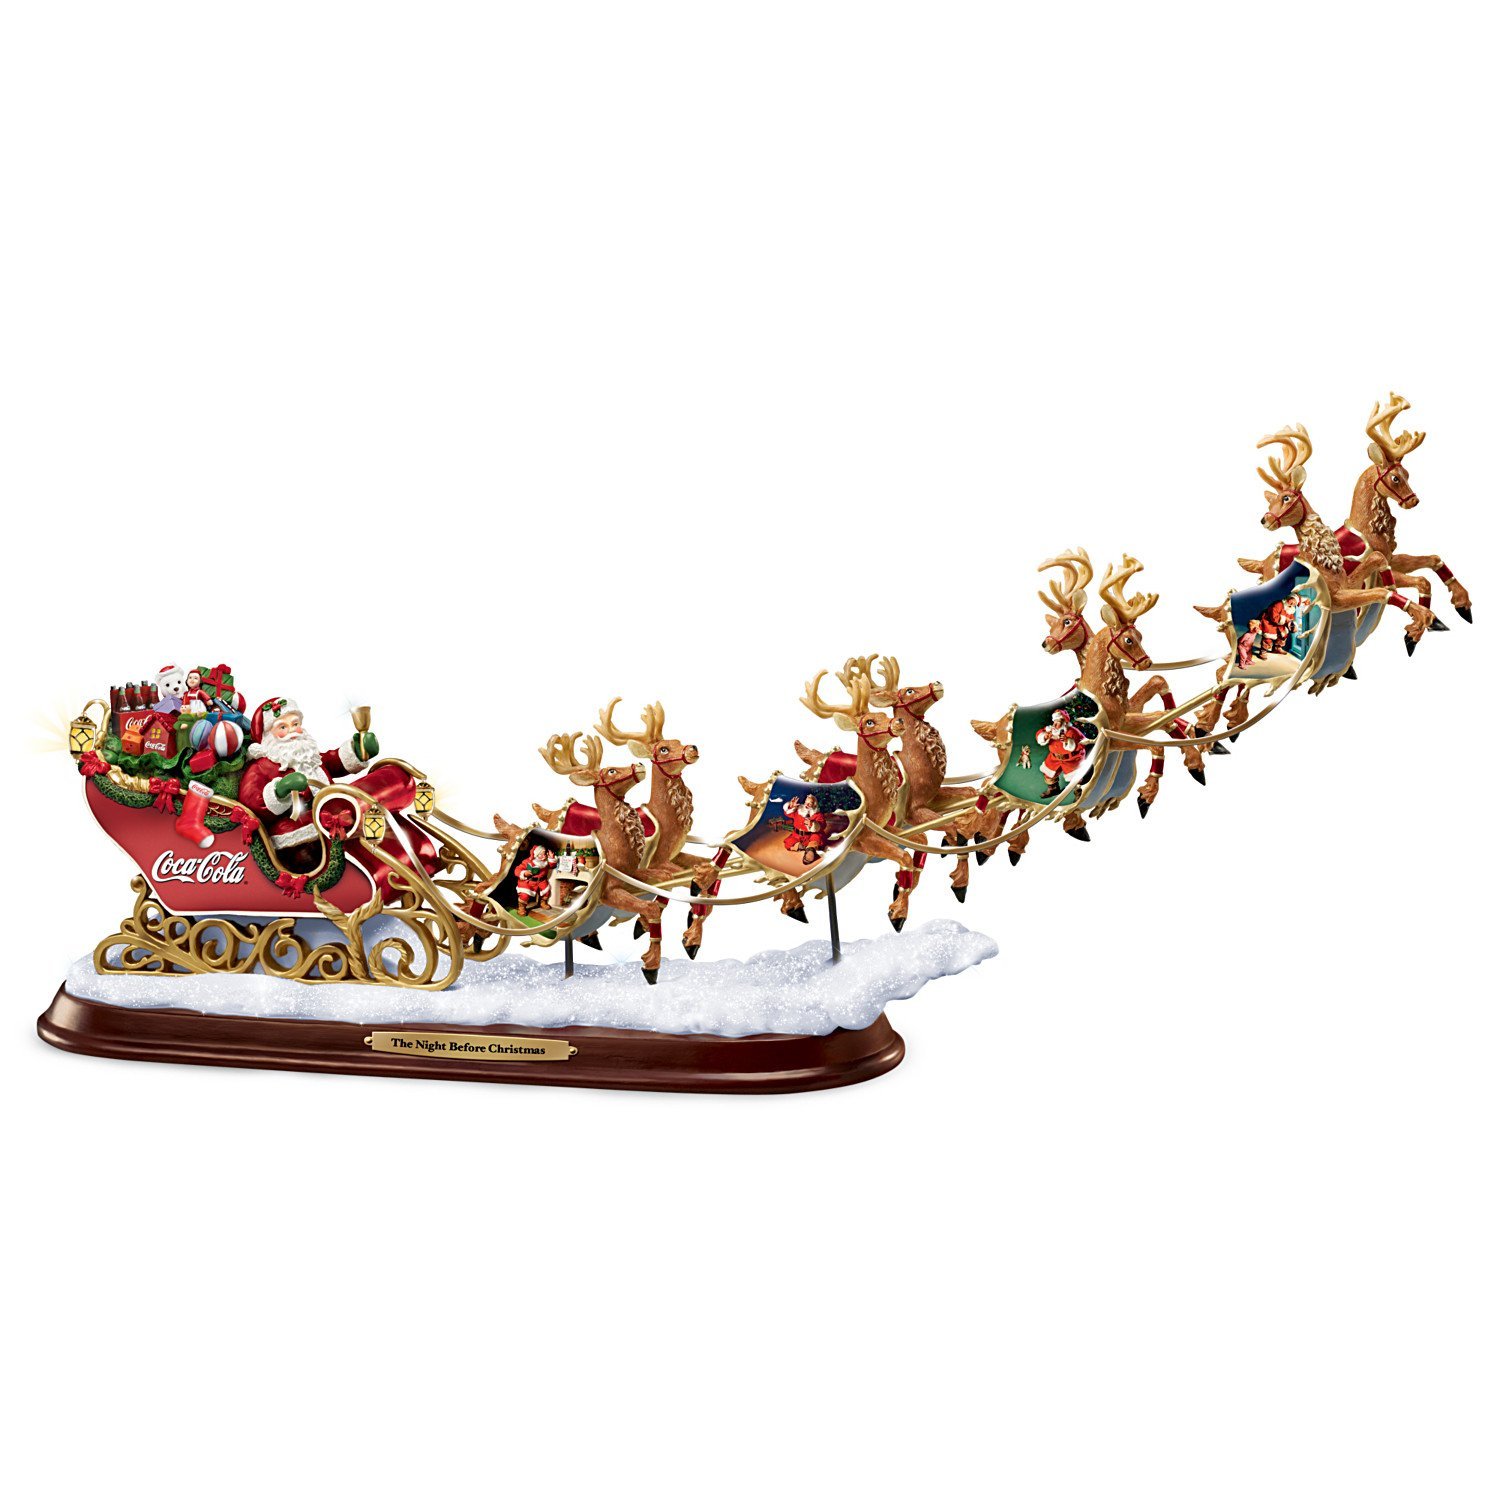 Pictures Of Santa S Sleigh